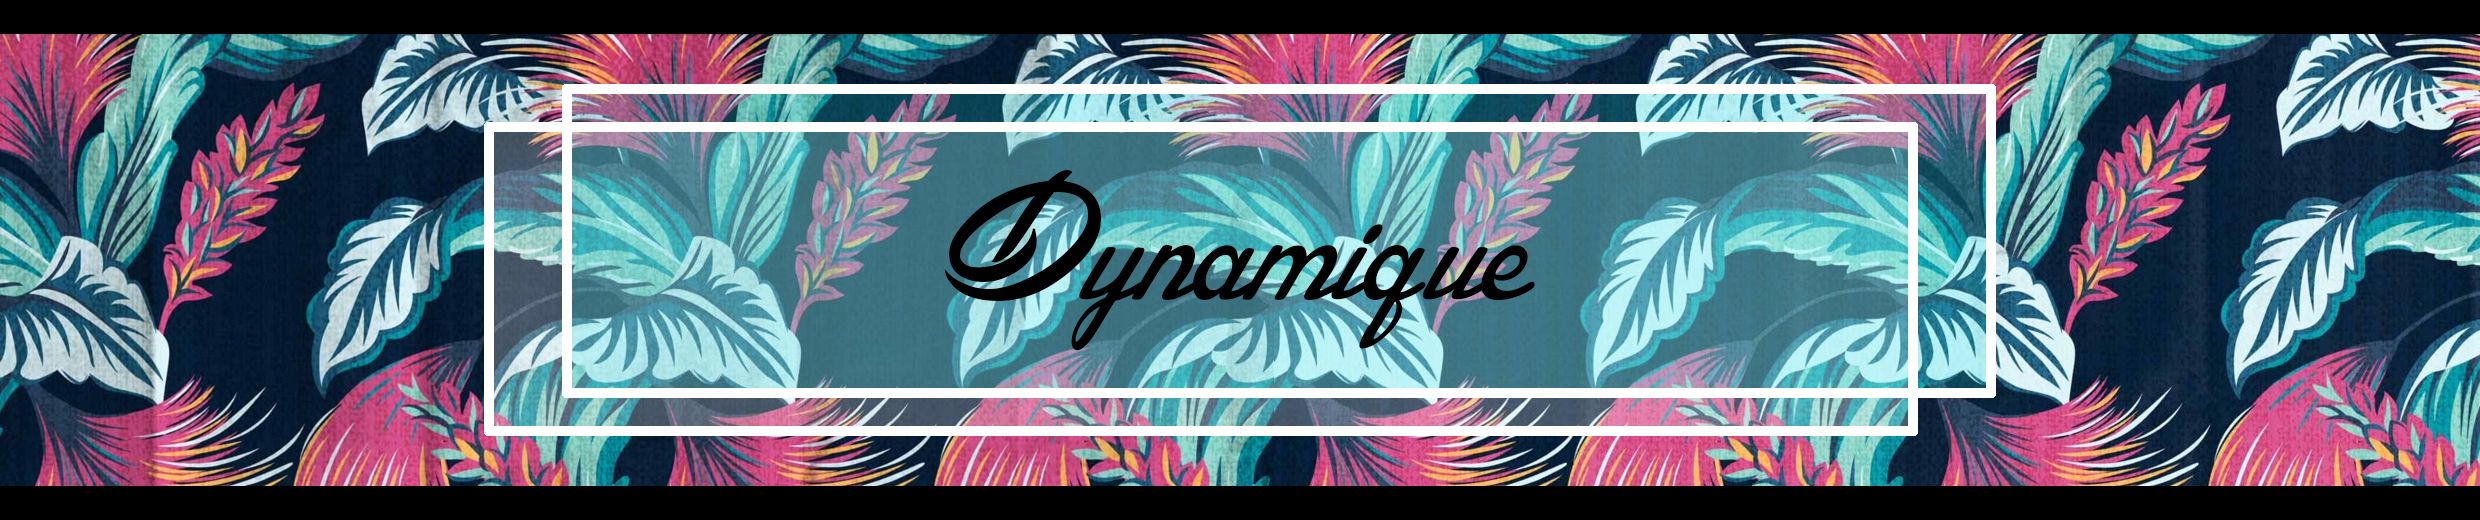 Phoenix If I Ever Feel Better Dynamique Edit Buy For Free Download By Dynamique